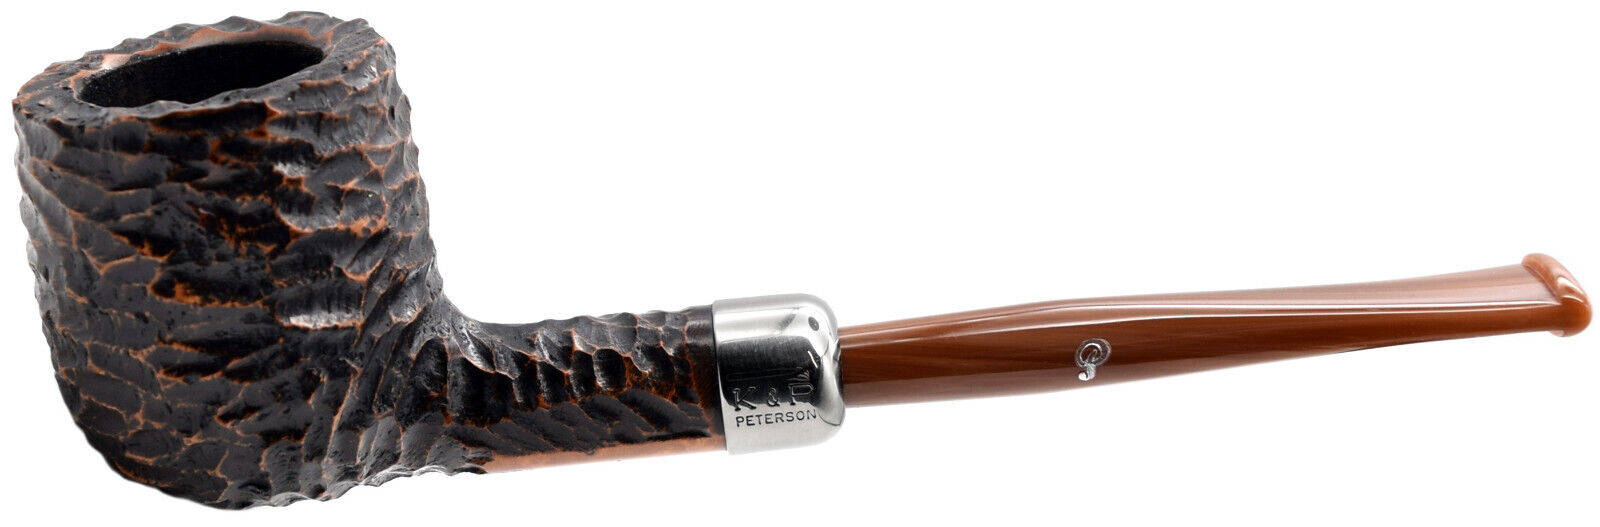 Peterson Derry Rusticated Finish Non Filter Large Straight Pot Briar Pipe (605)